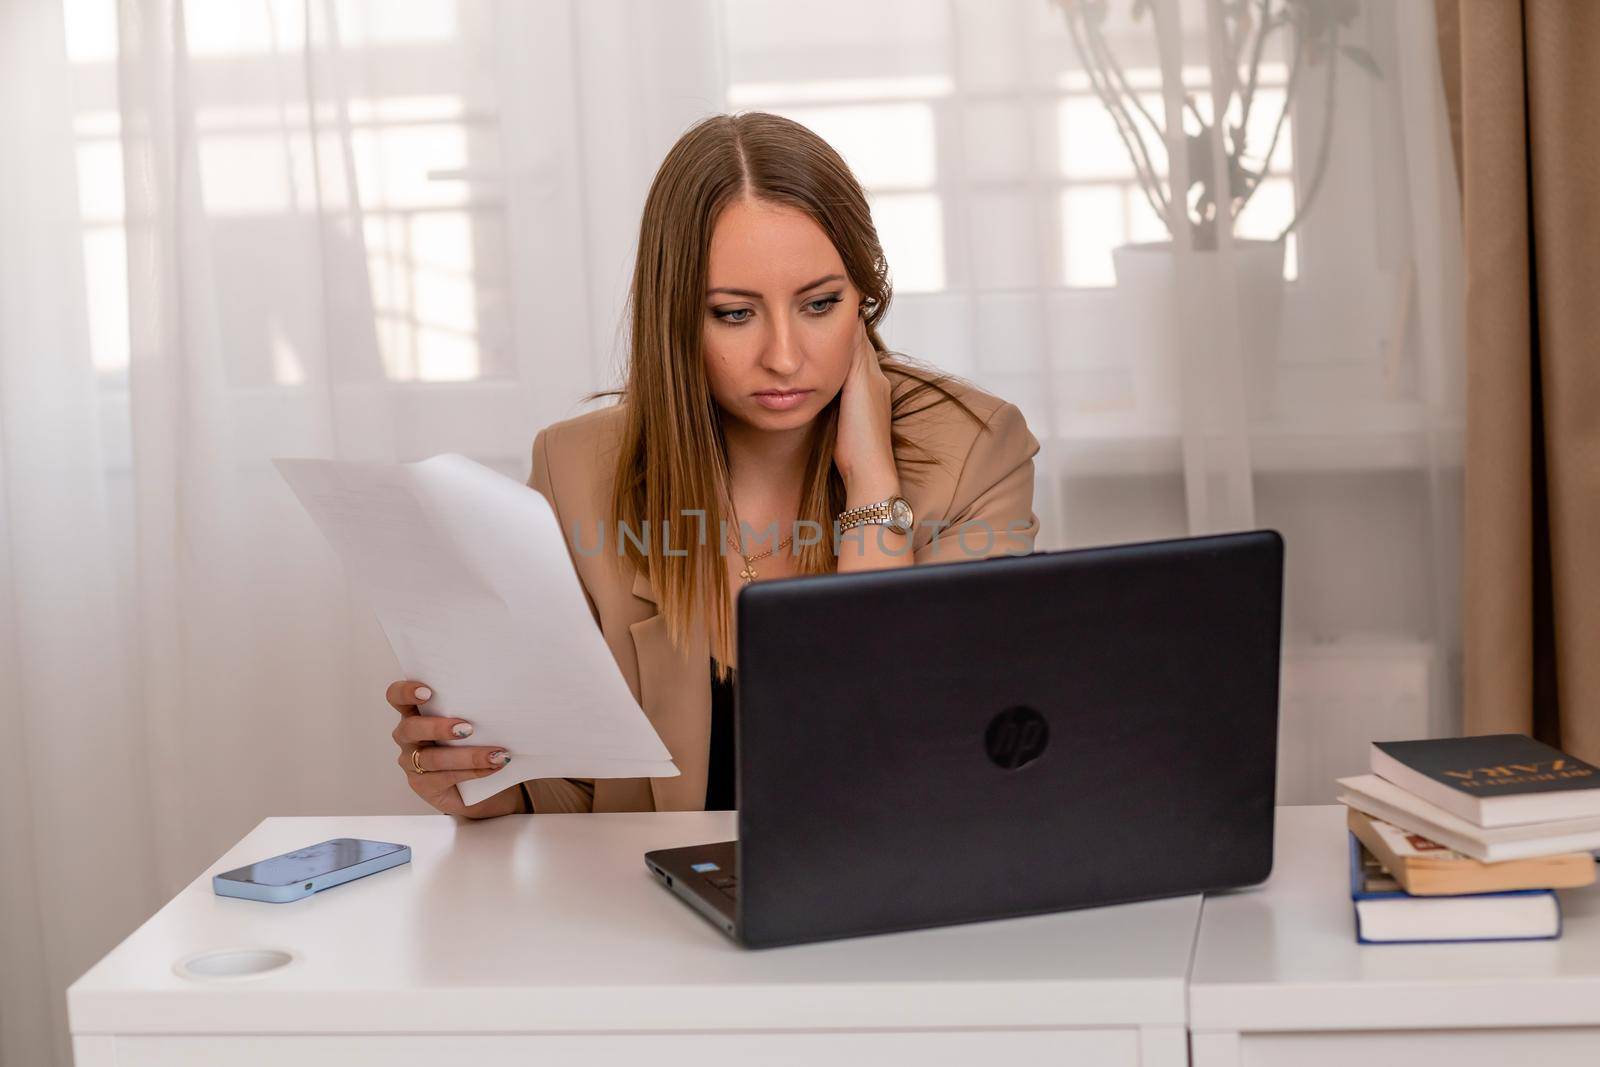 European professional woman sitting with laptop at home office desk, positive woman studying while working on PC. She is wearing a beige jacket and jeans